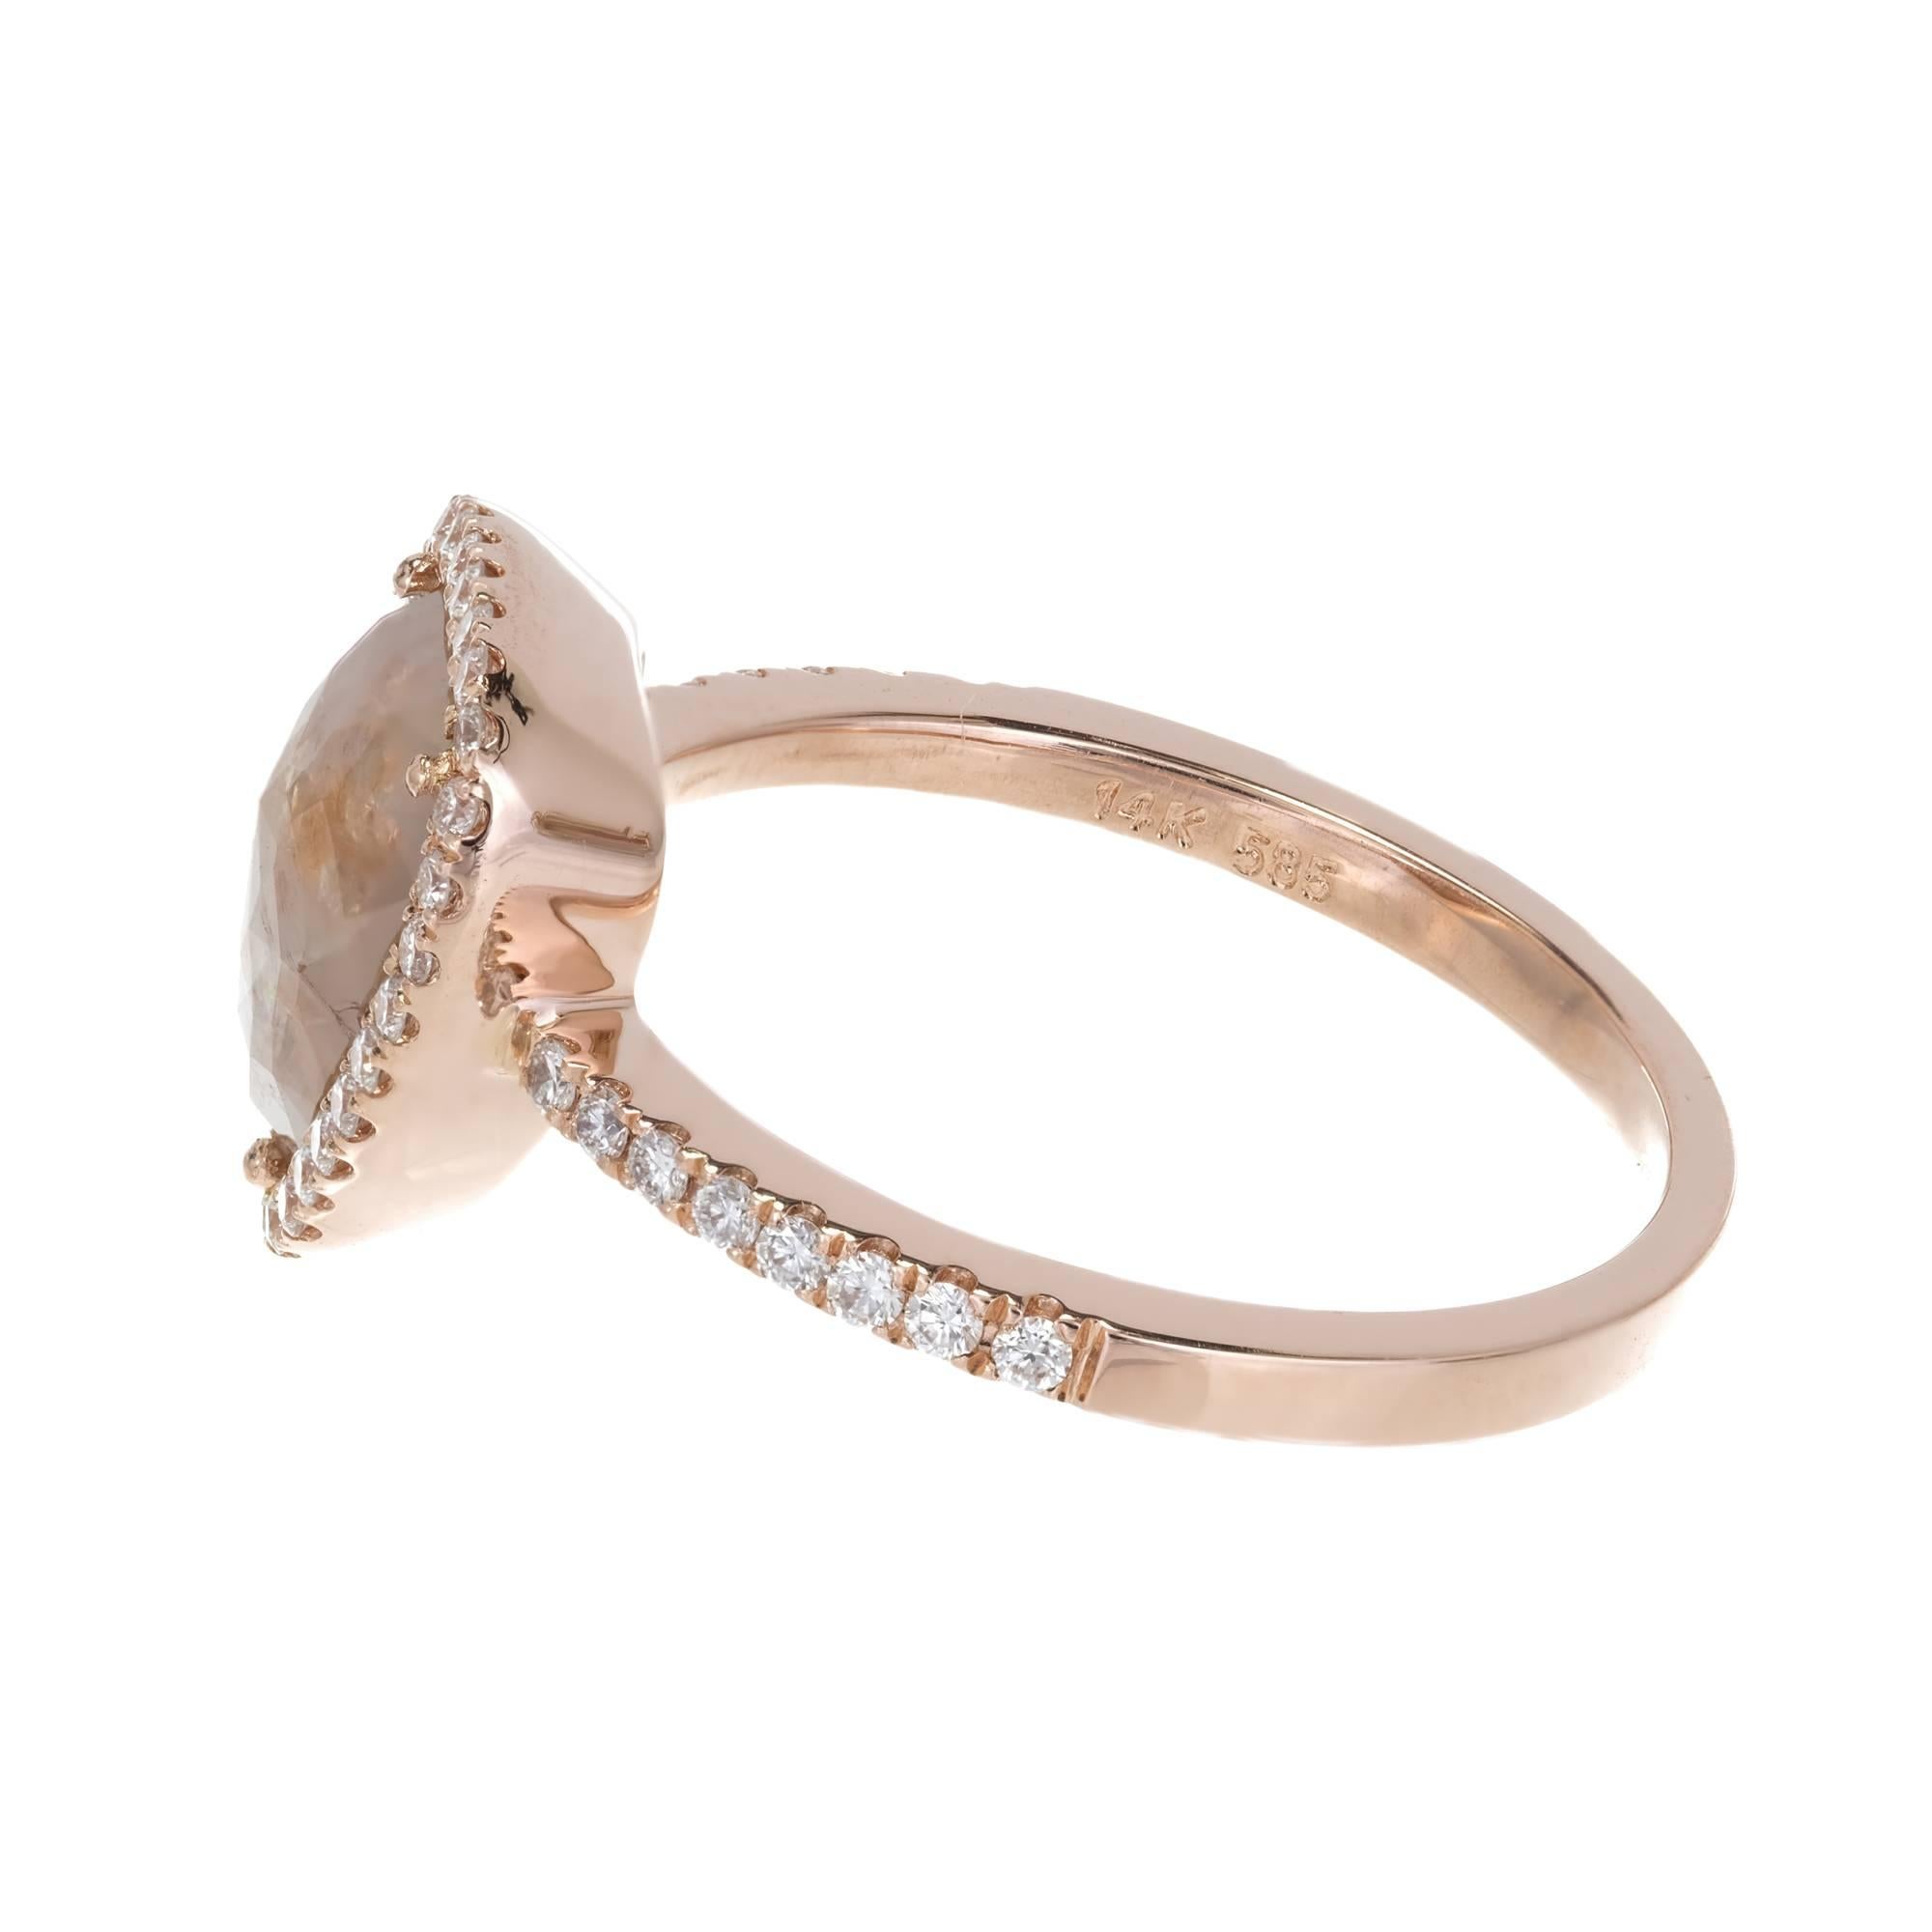 1.34 Carat Pear Diamond Rose Gold Engagement Ring In Good Condition For Sale In Stamford, CT